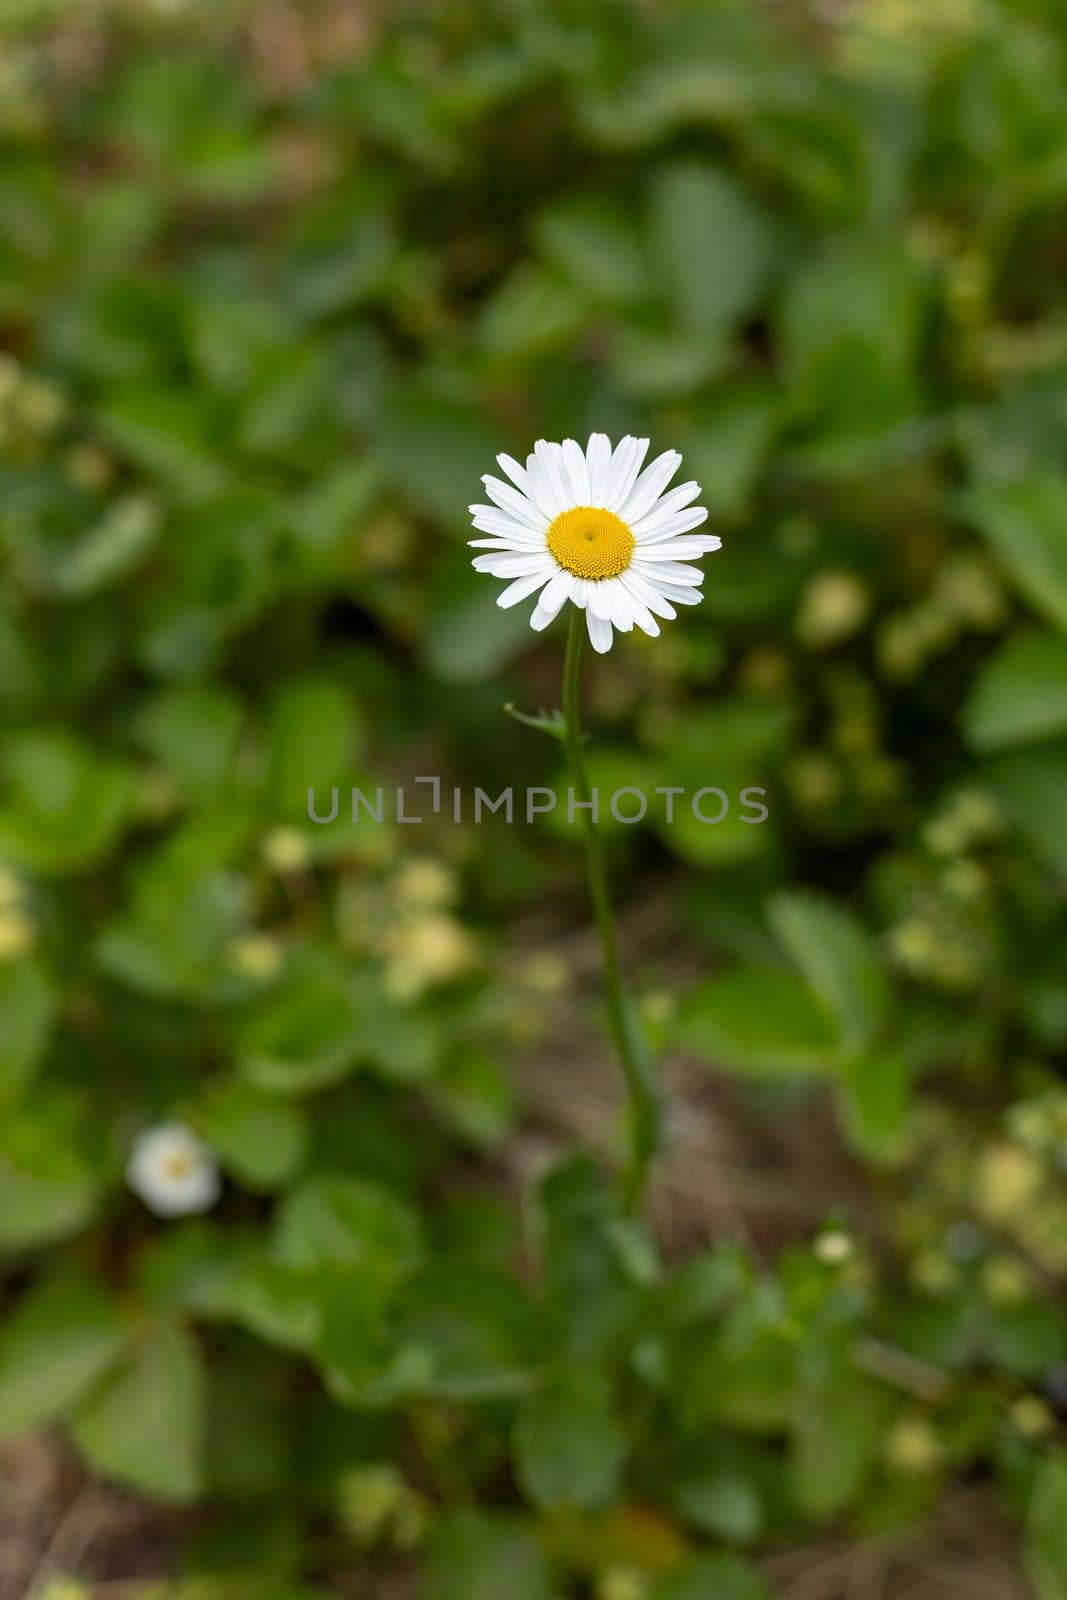 Bud of a white chamomile flower in the garden with the blurred green natural background. Shallow depth of field.